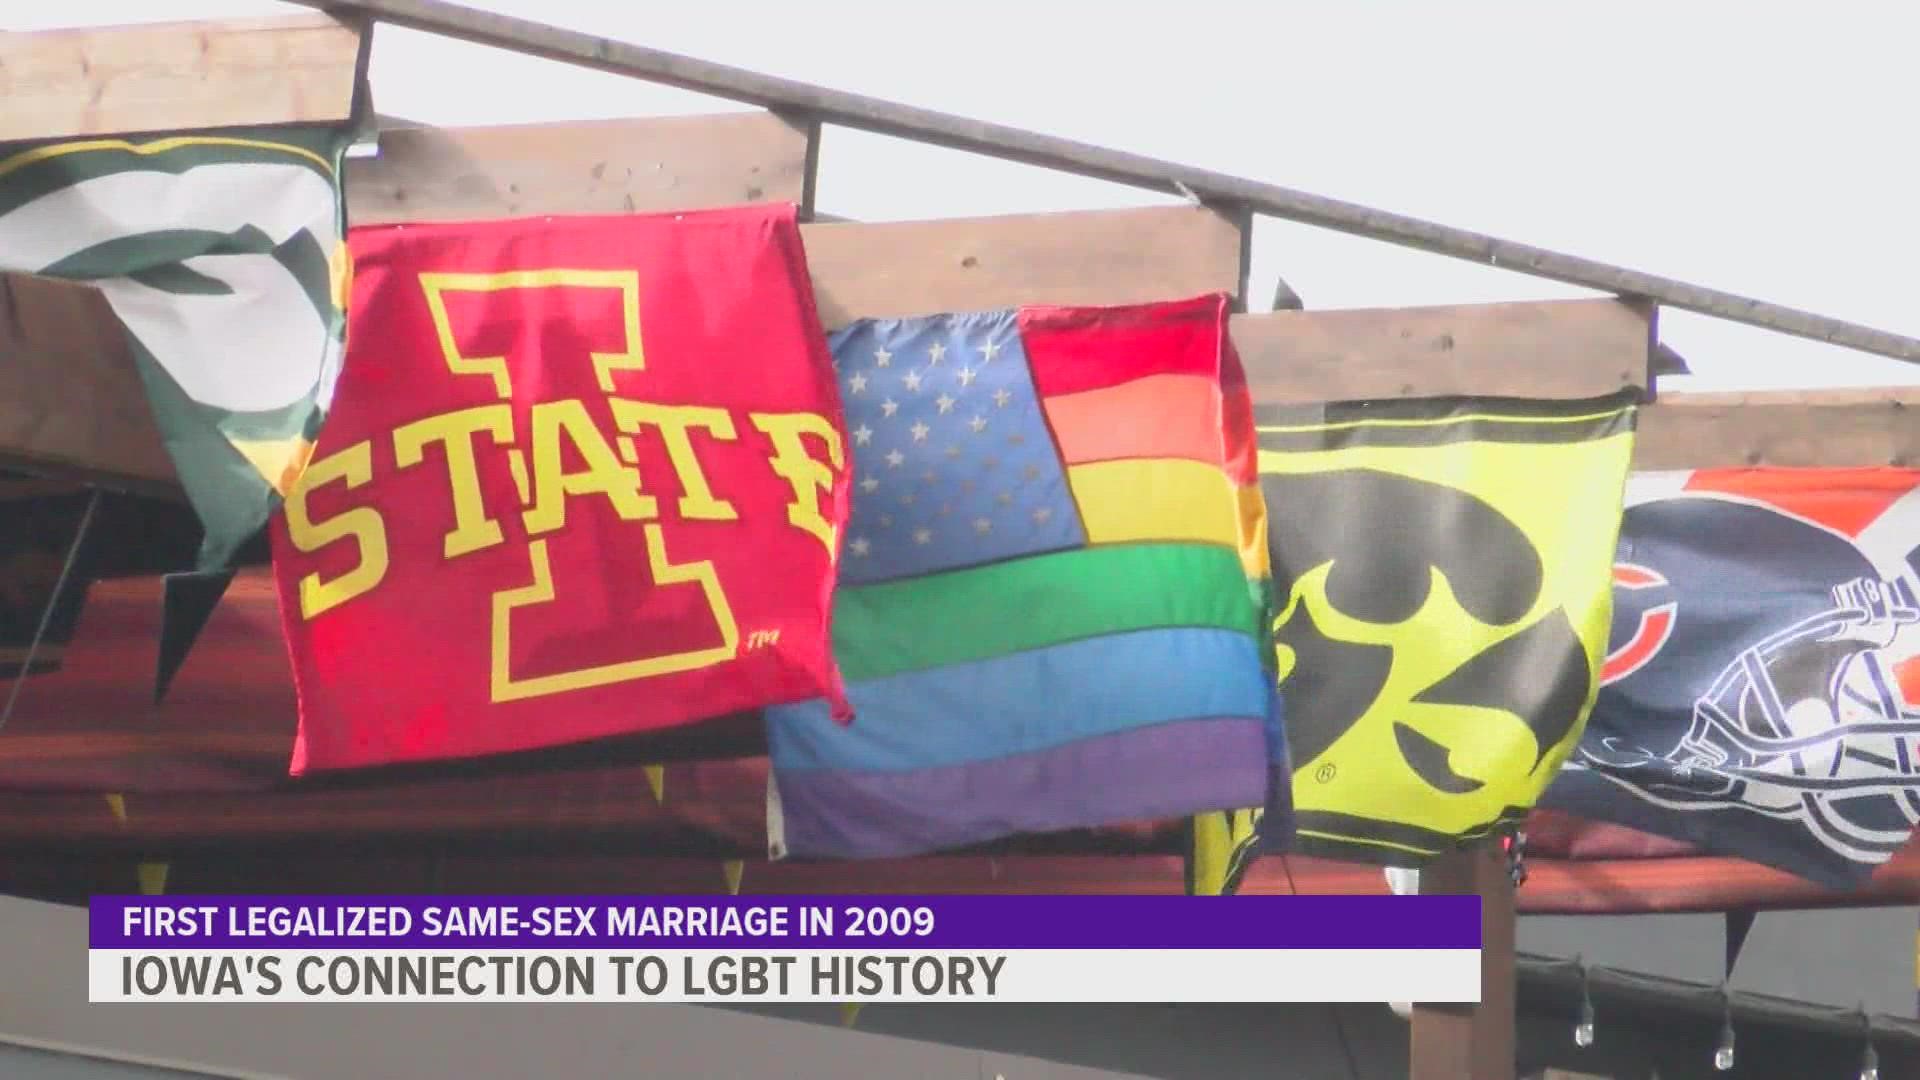 The idea for LGBT History Month first came from a high school teacher in Missouri.